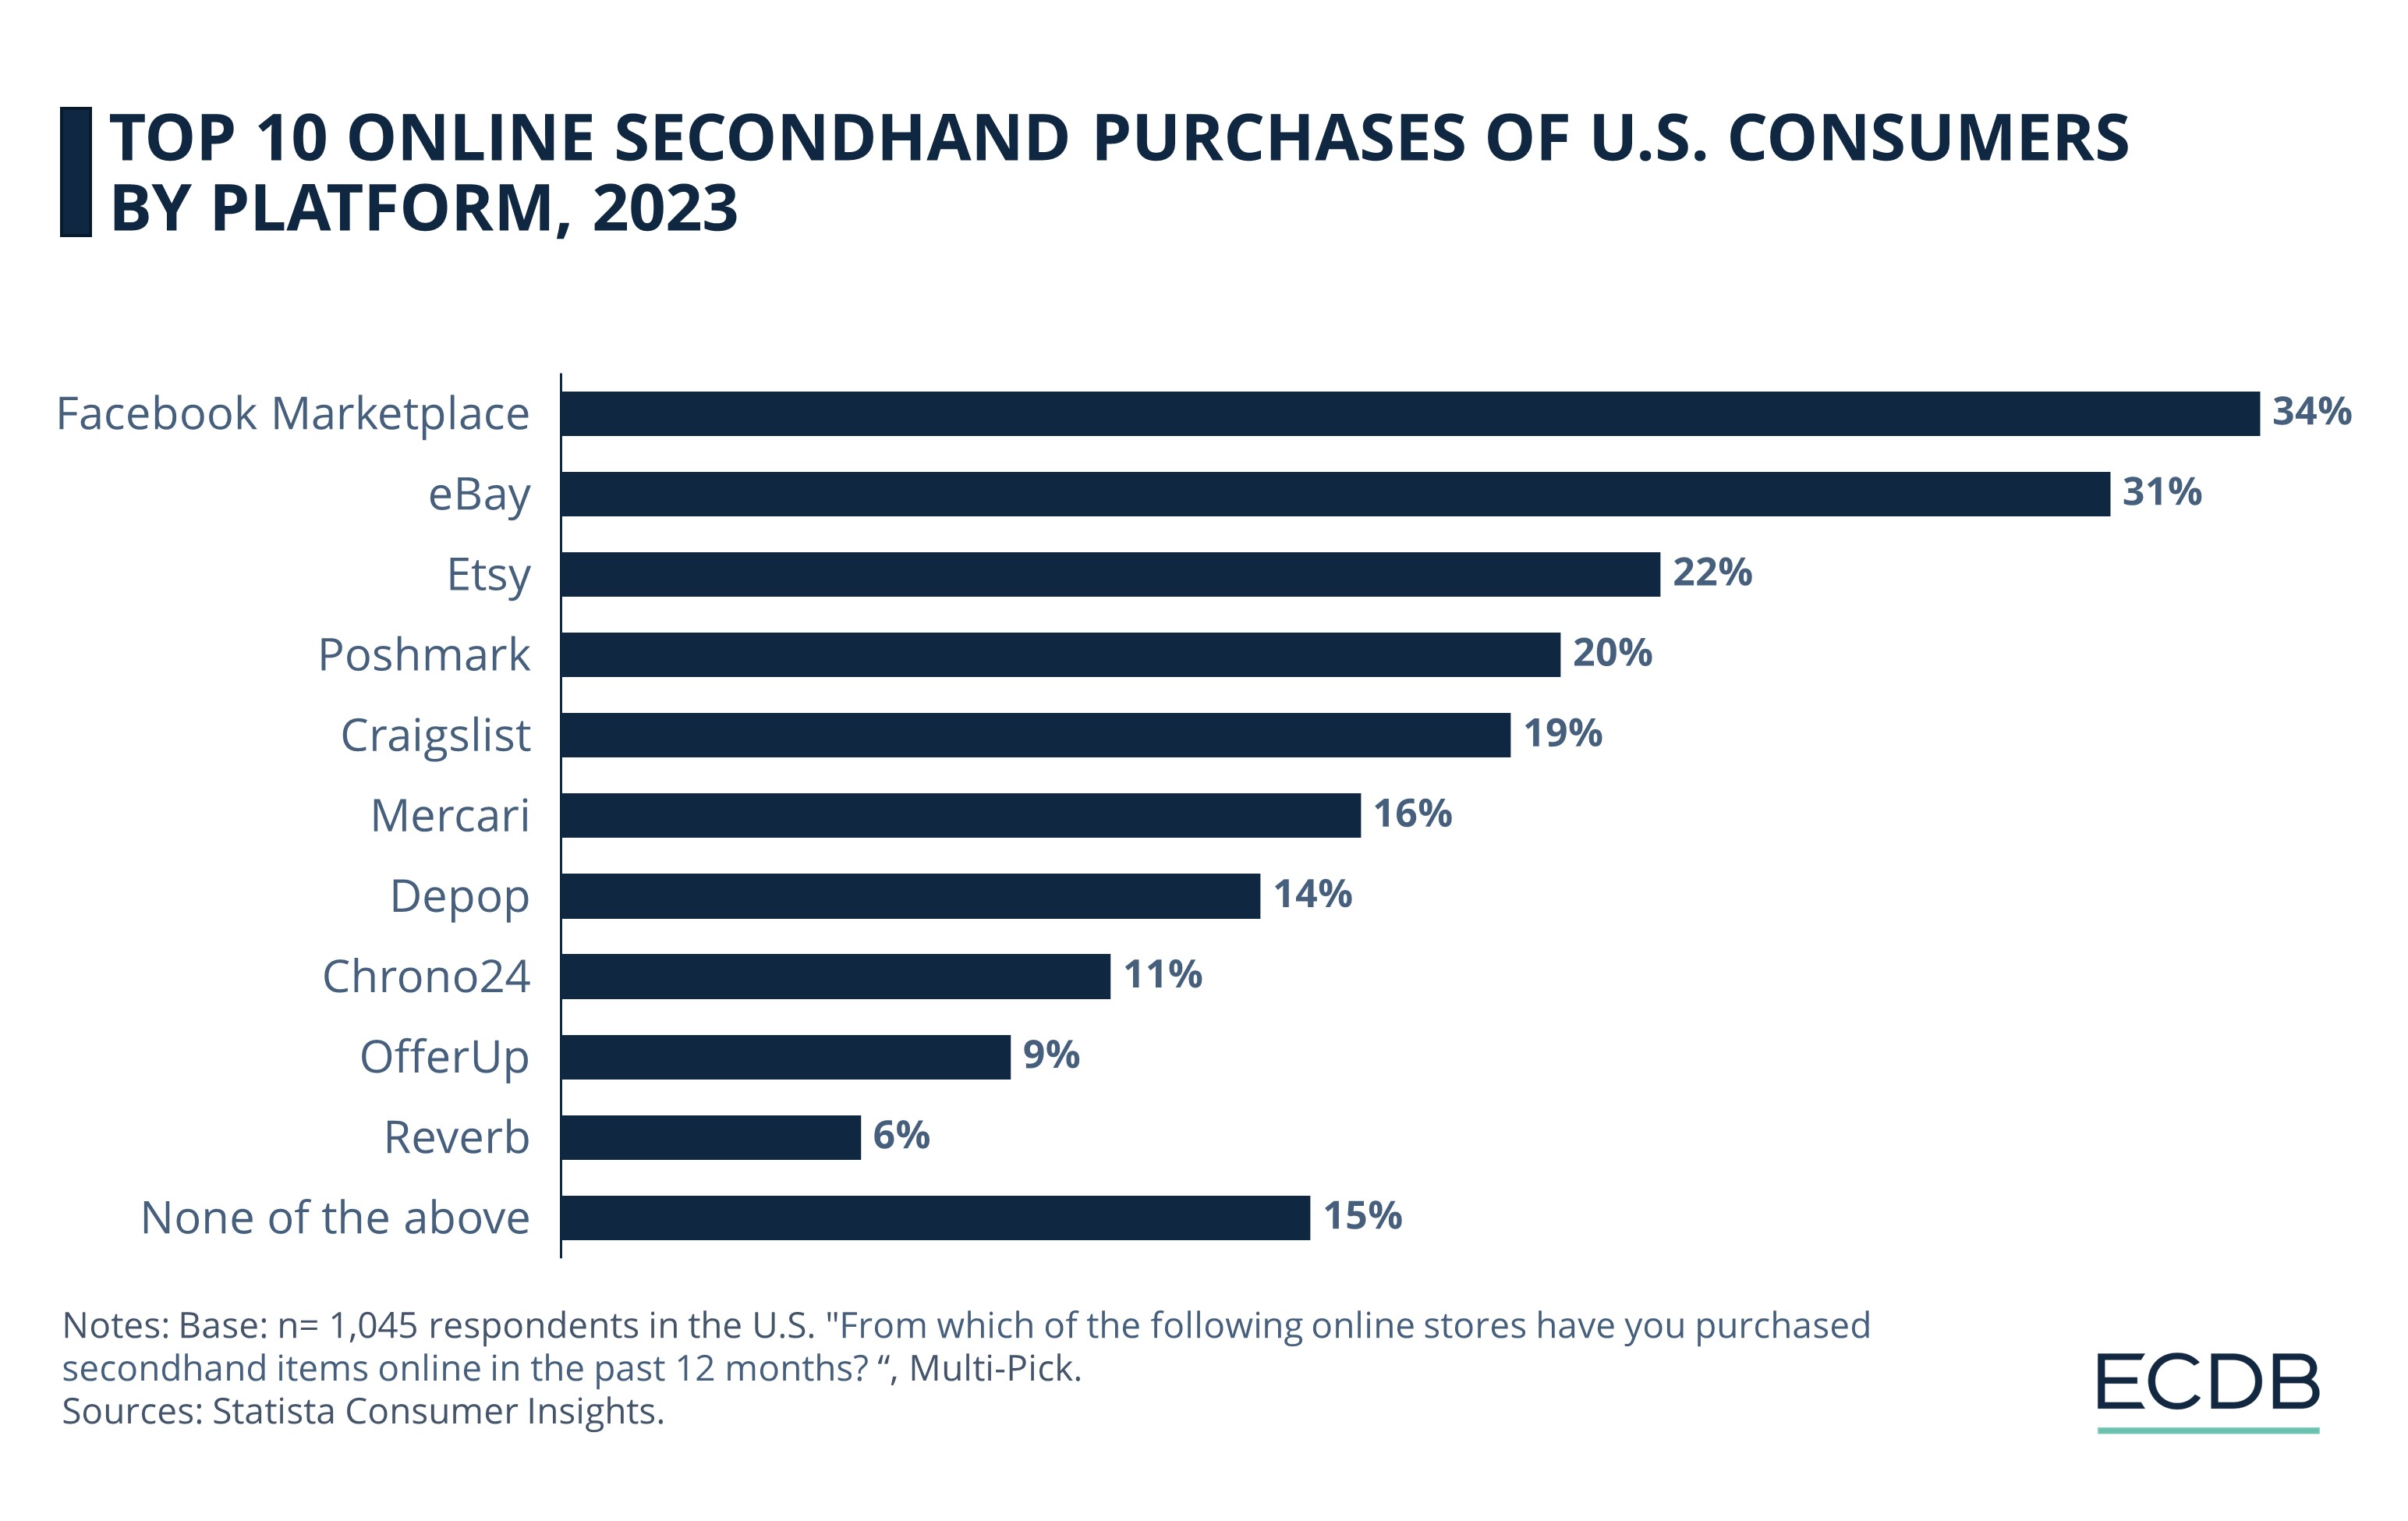 Top 10 Online Secondhand Purchases of U.S. Consumers by Platform, 2023